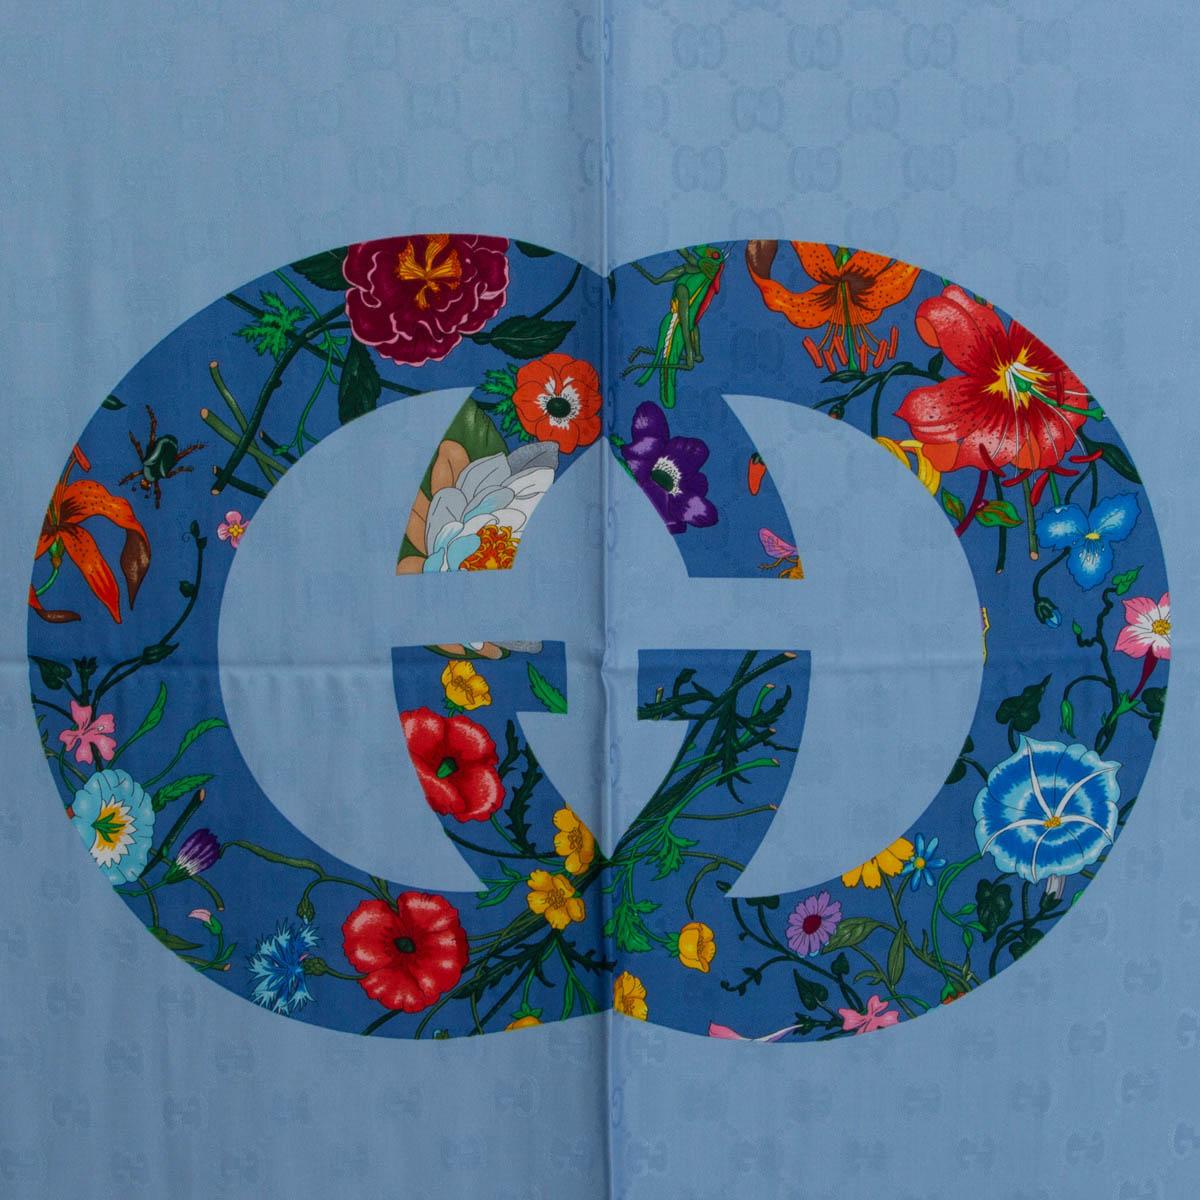 100% authentic Gucci Flora GG Vinatge print shawl in light blue modal (70%), viscose (24%) and silk (6%)combines two of the House's most distinctive designs into an unexpected and contemporary pattern. The historic Flora motif, first presented by